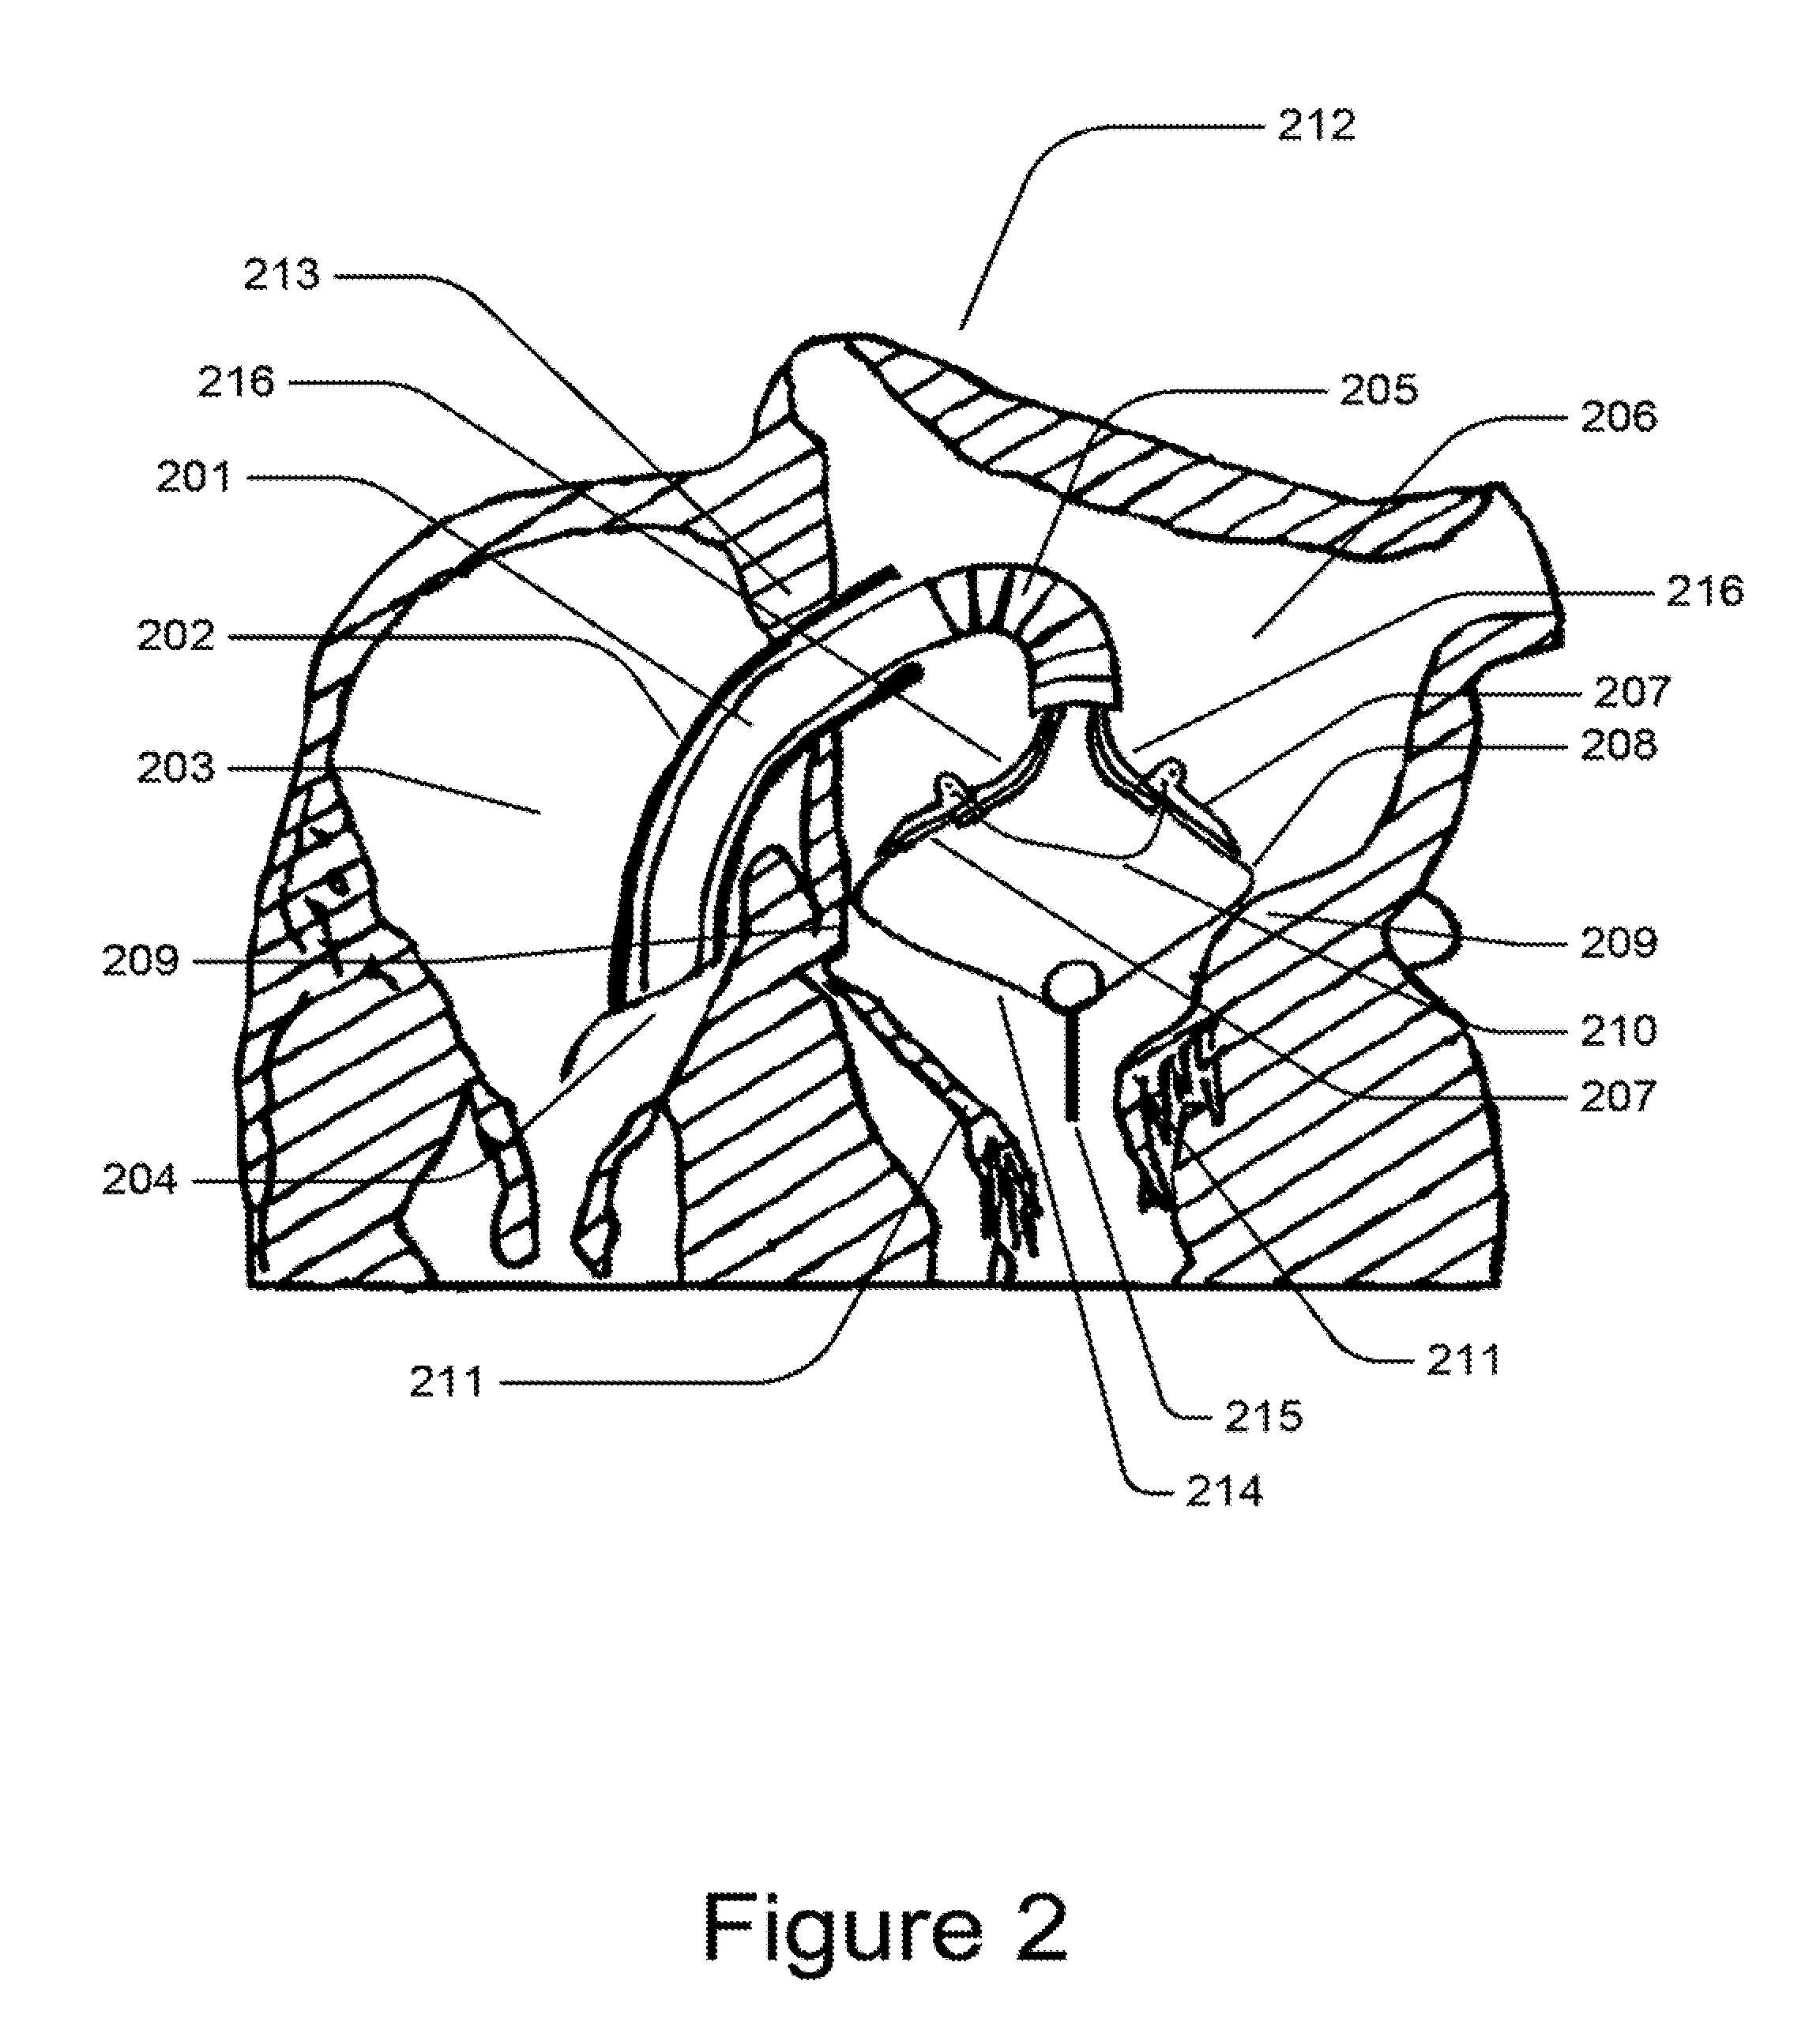 Medical device for constricting tissue or a bodily orifice, for example a mitral valve